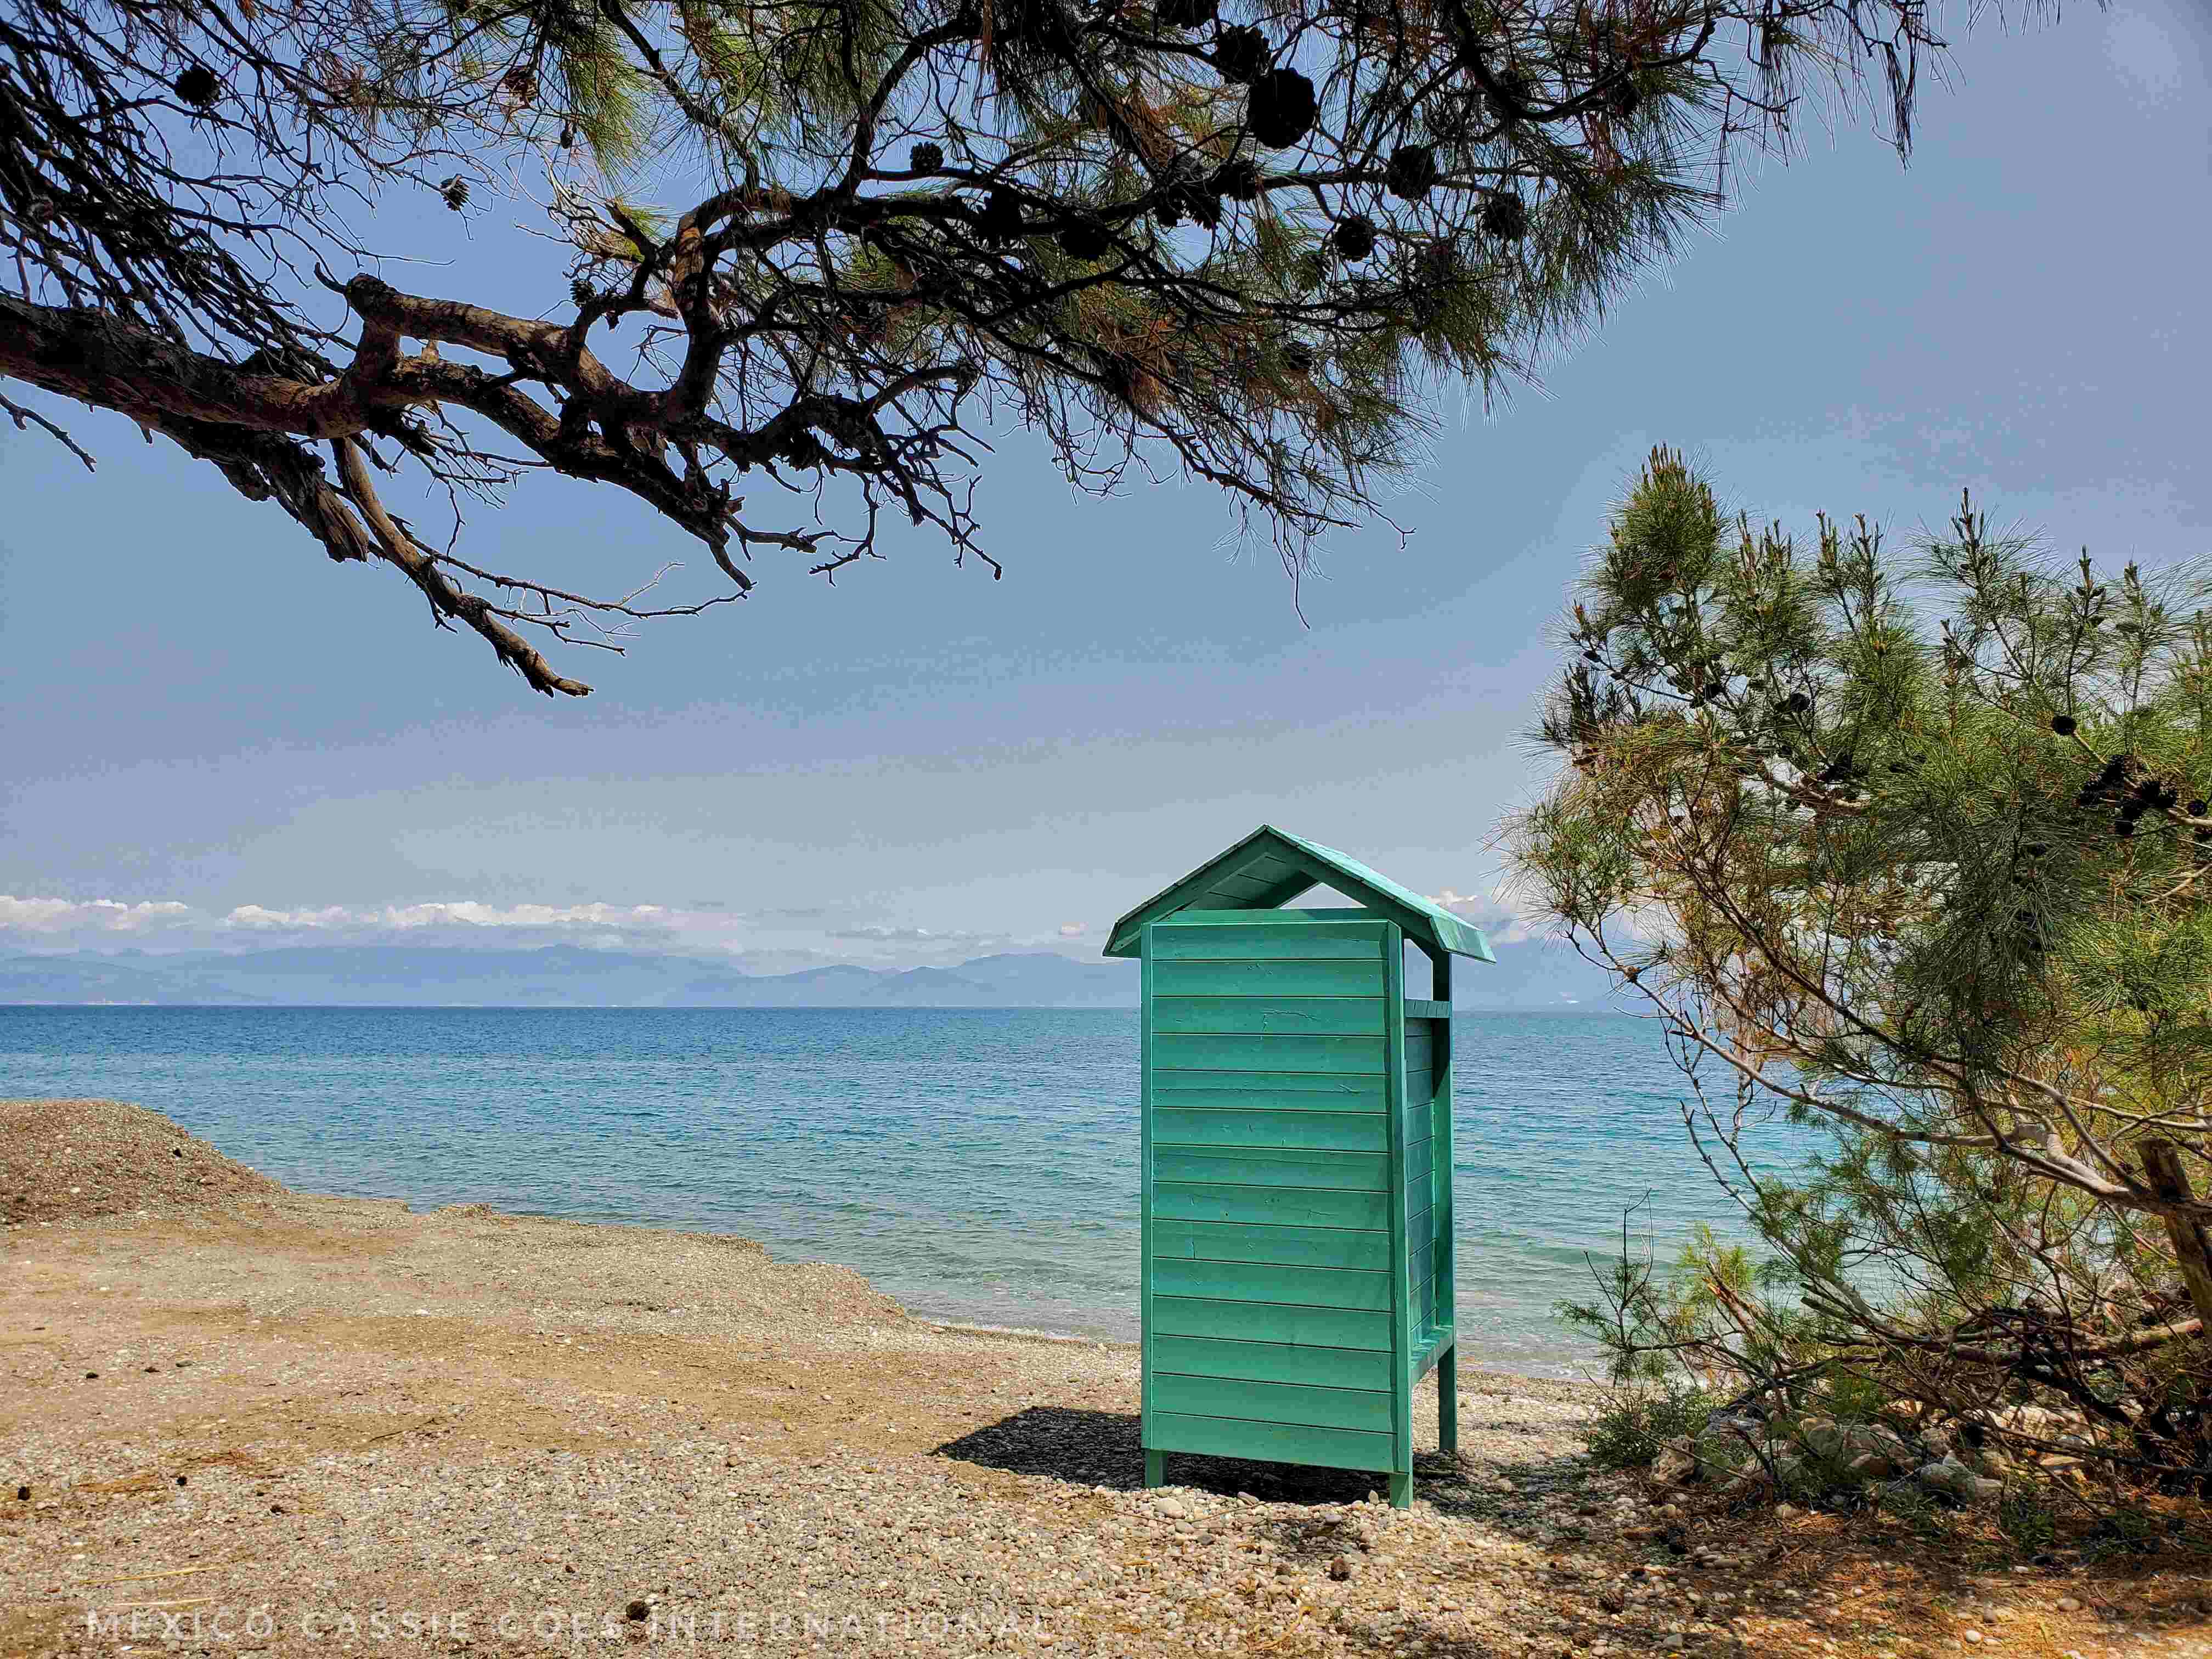 green beach hut standing on gentle blue sea shore. Mountains faint in background. Pine trees in foreground